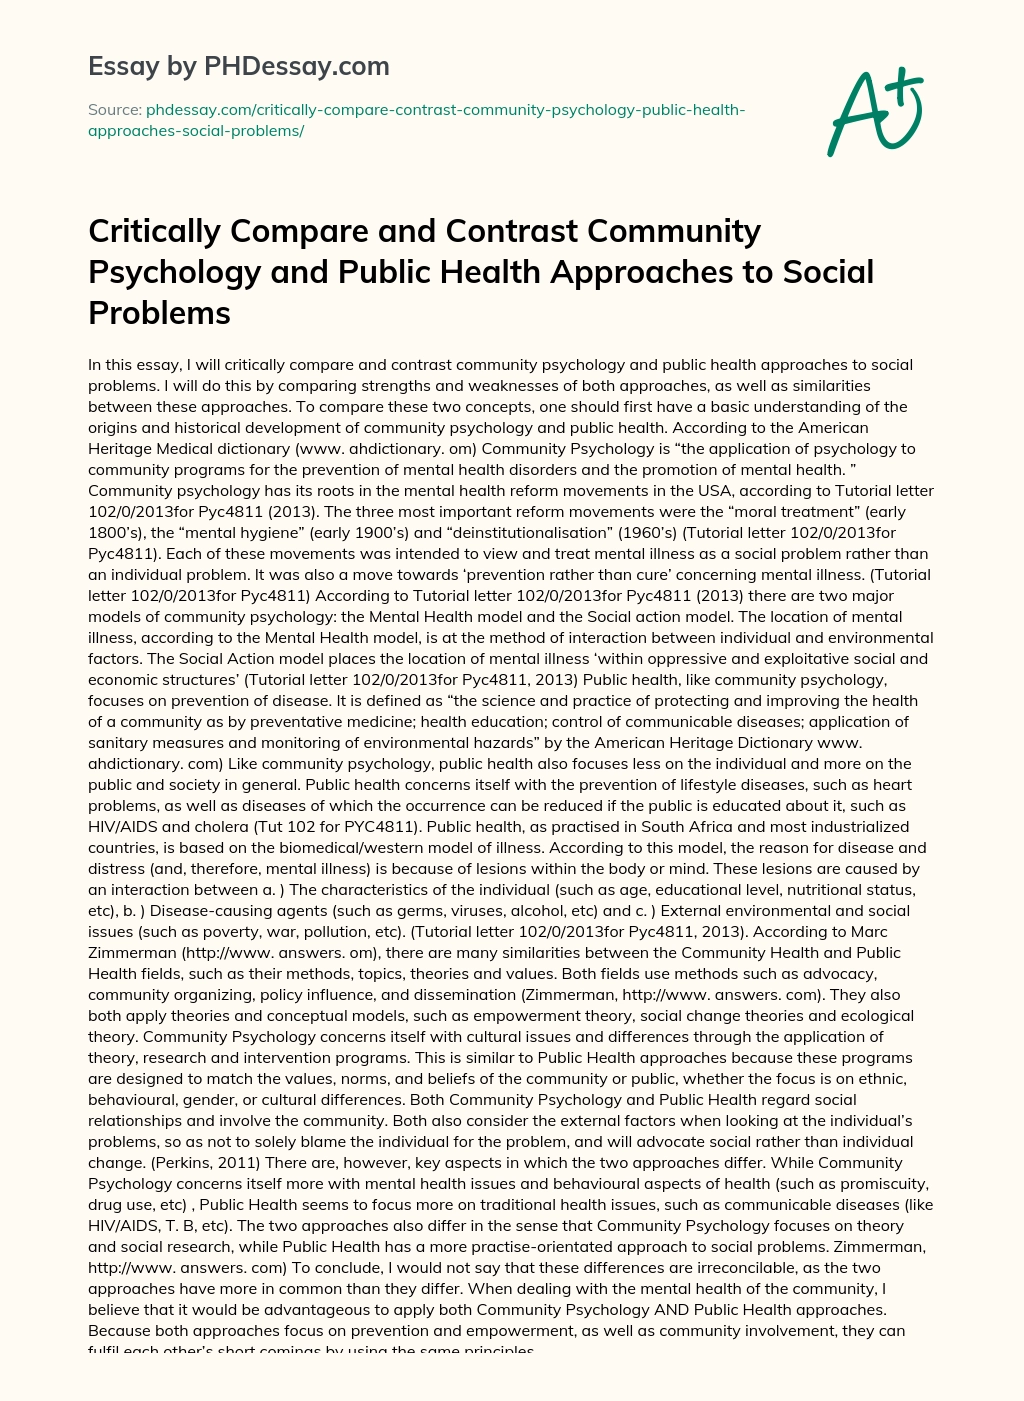 Critically Compare and Contrast Community Psychology and Public Health Approaches to Social Problems essay